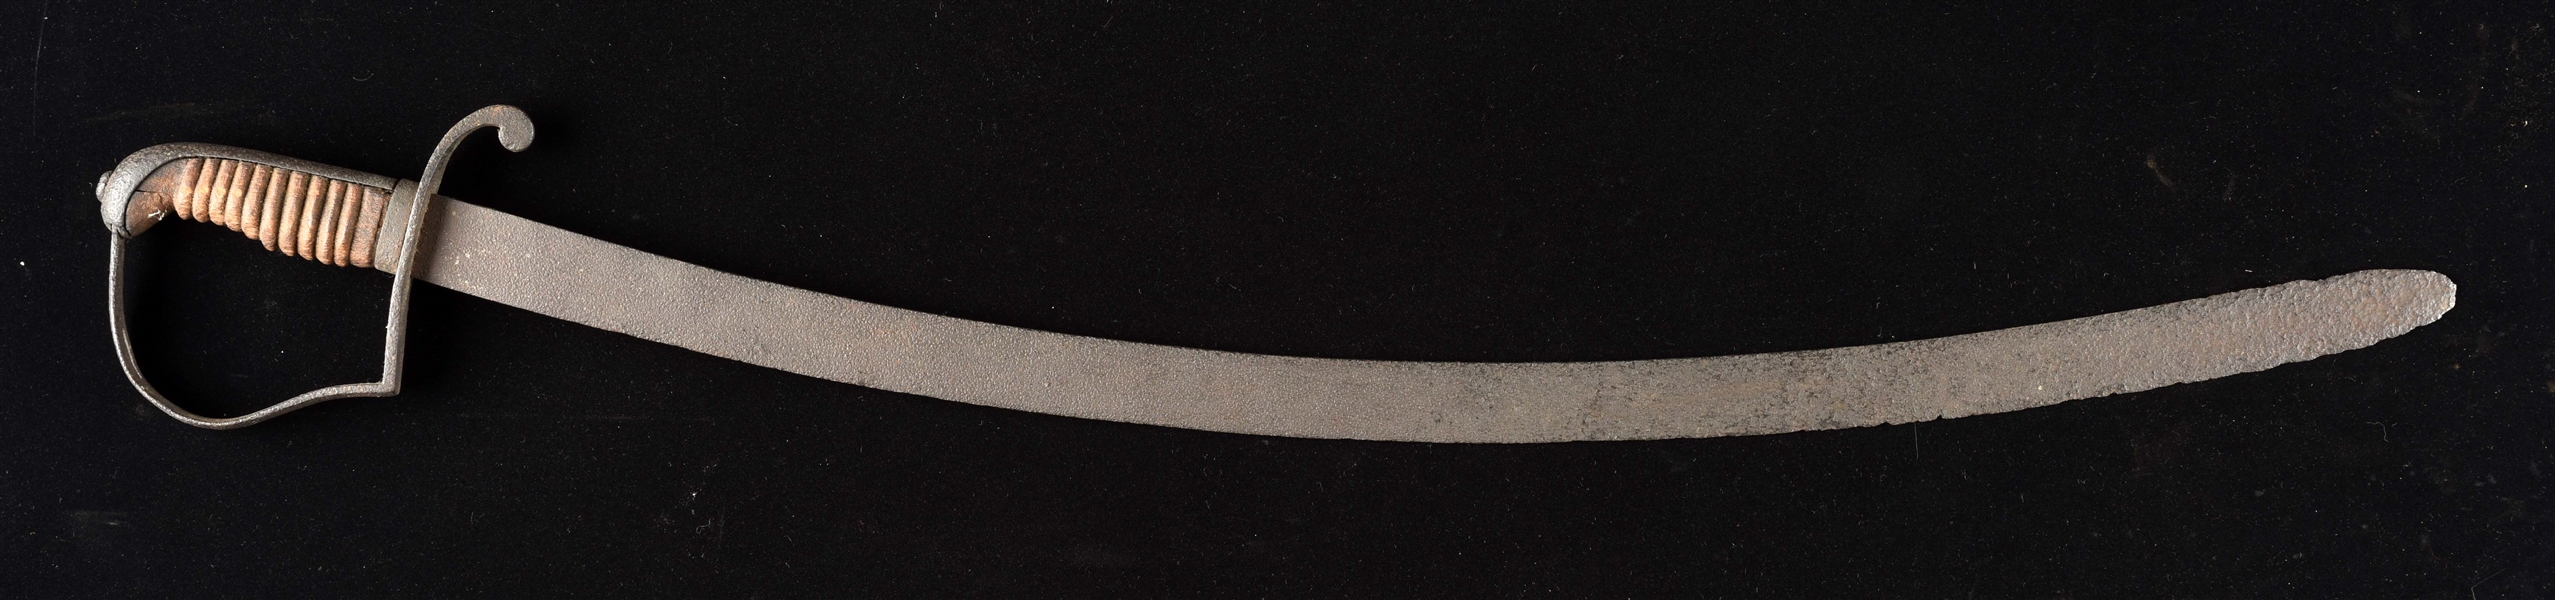 1812 CONTRACT "ROSE" MARKED CAVALRY SABER.